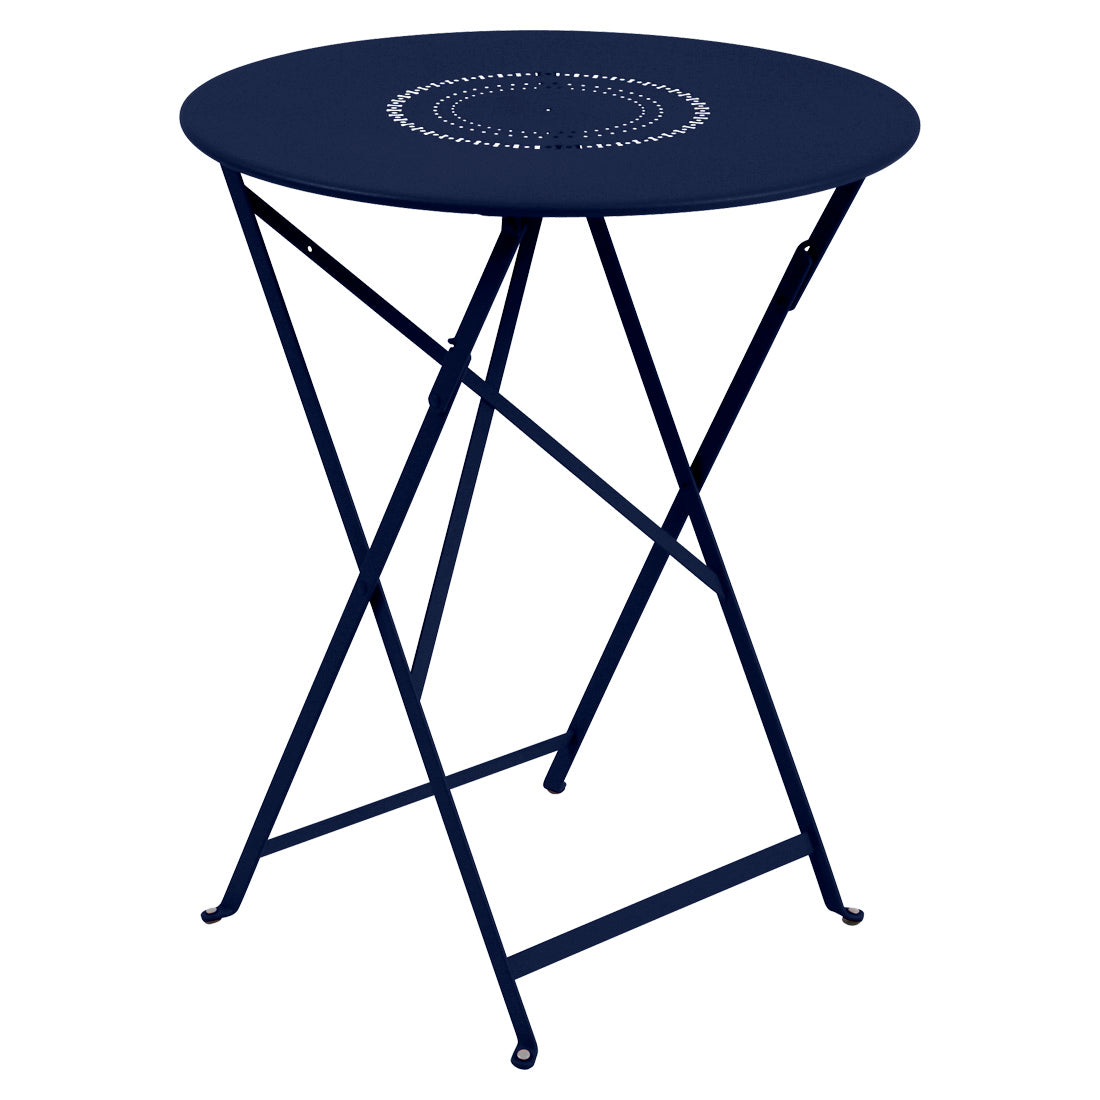 Fermob Floreal 23.5" Round Dining Table